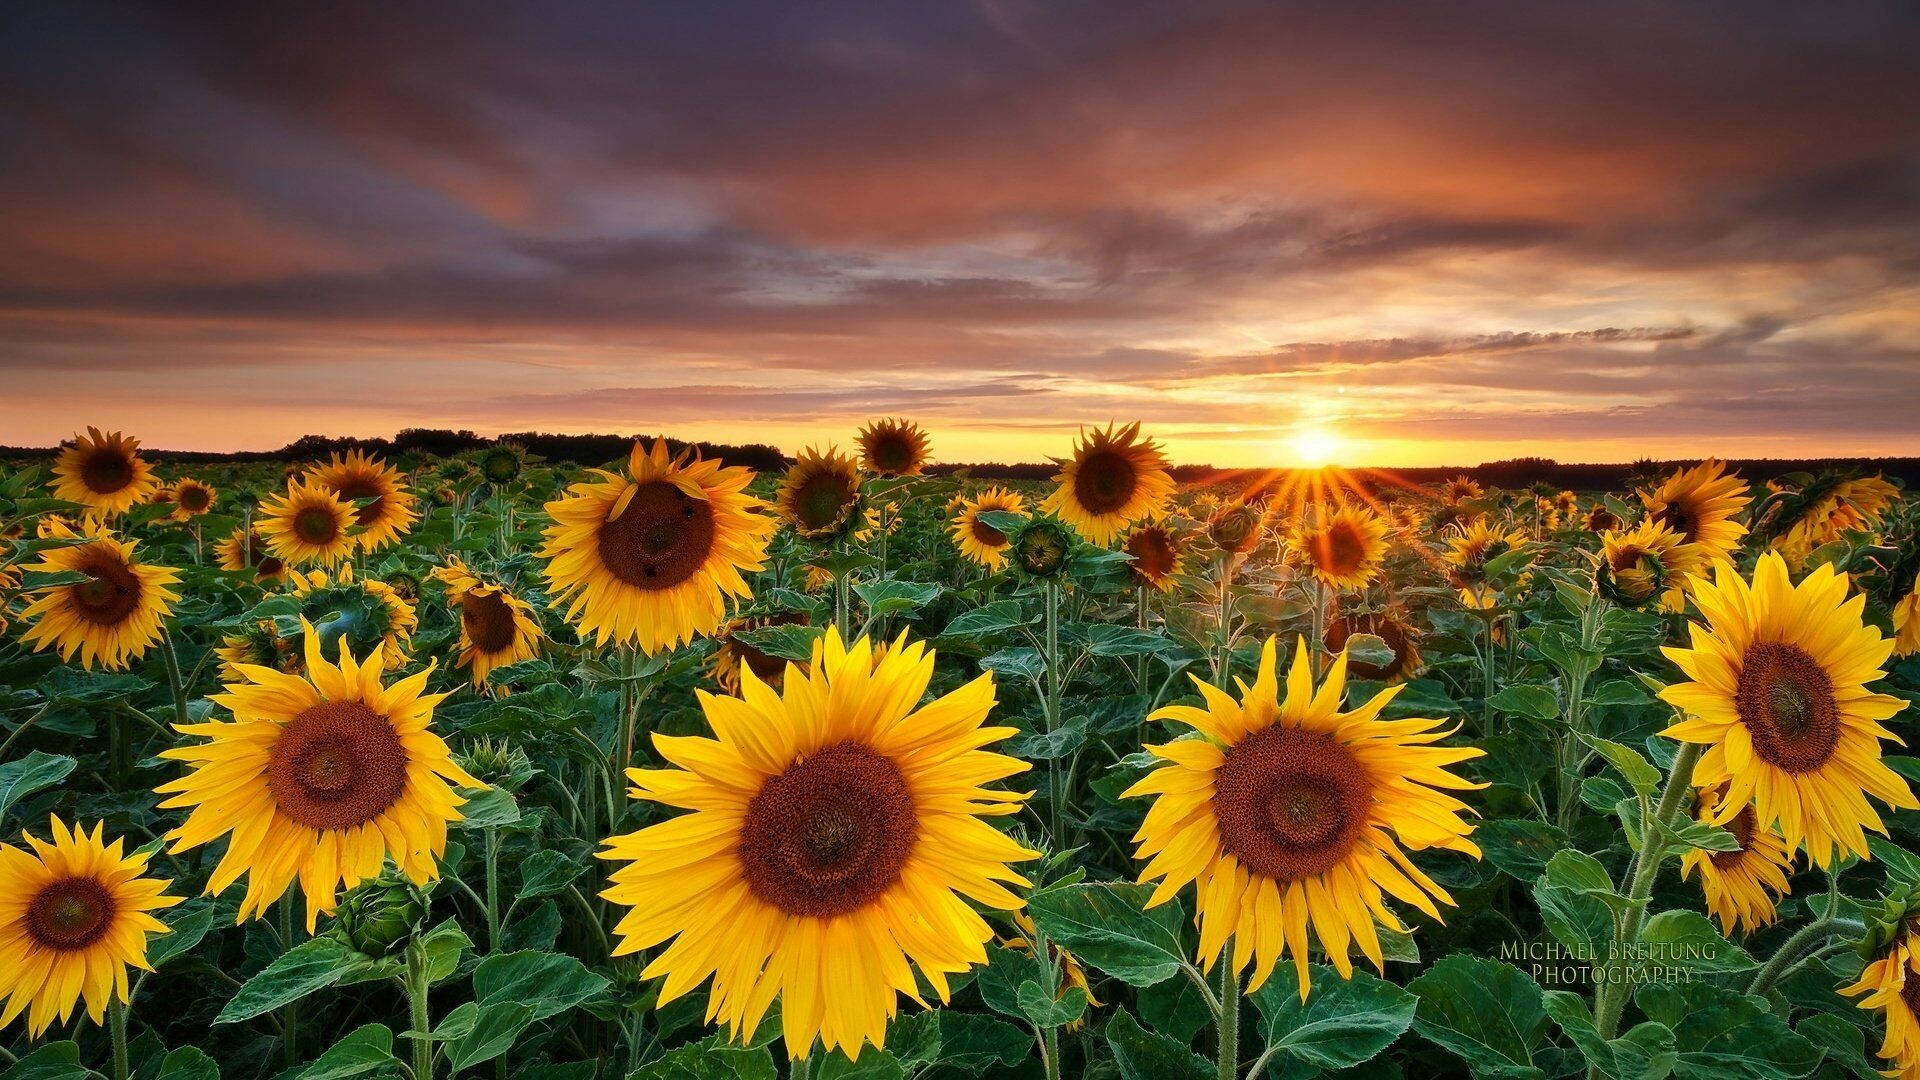 "The beauty of nature revealed in a colorful blend of sunflowers and roses" Wallpaper